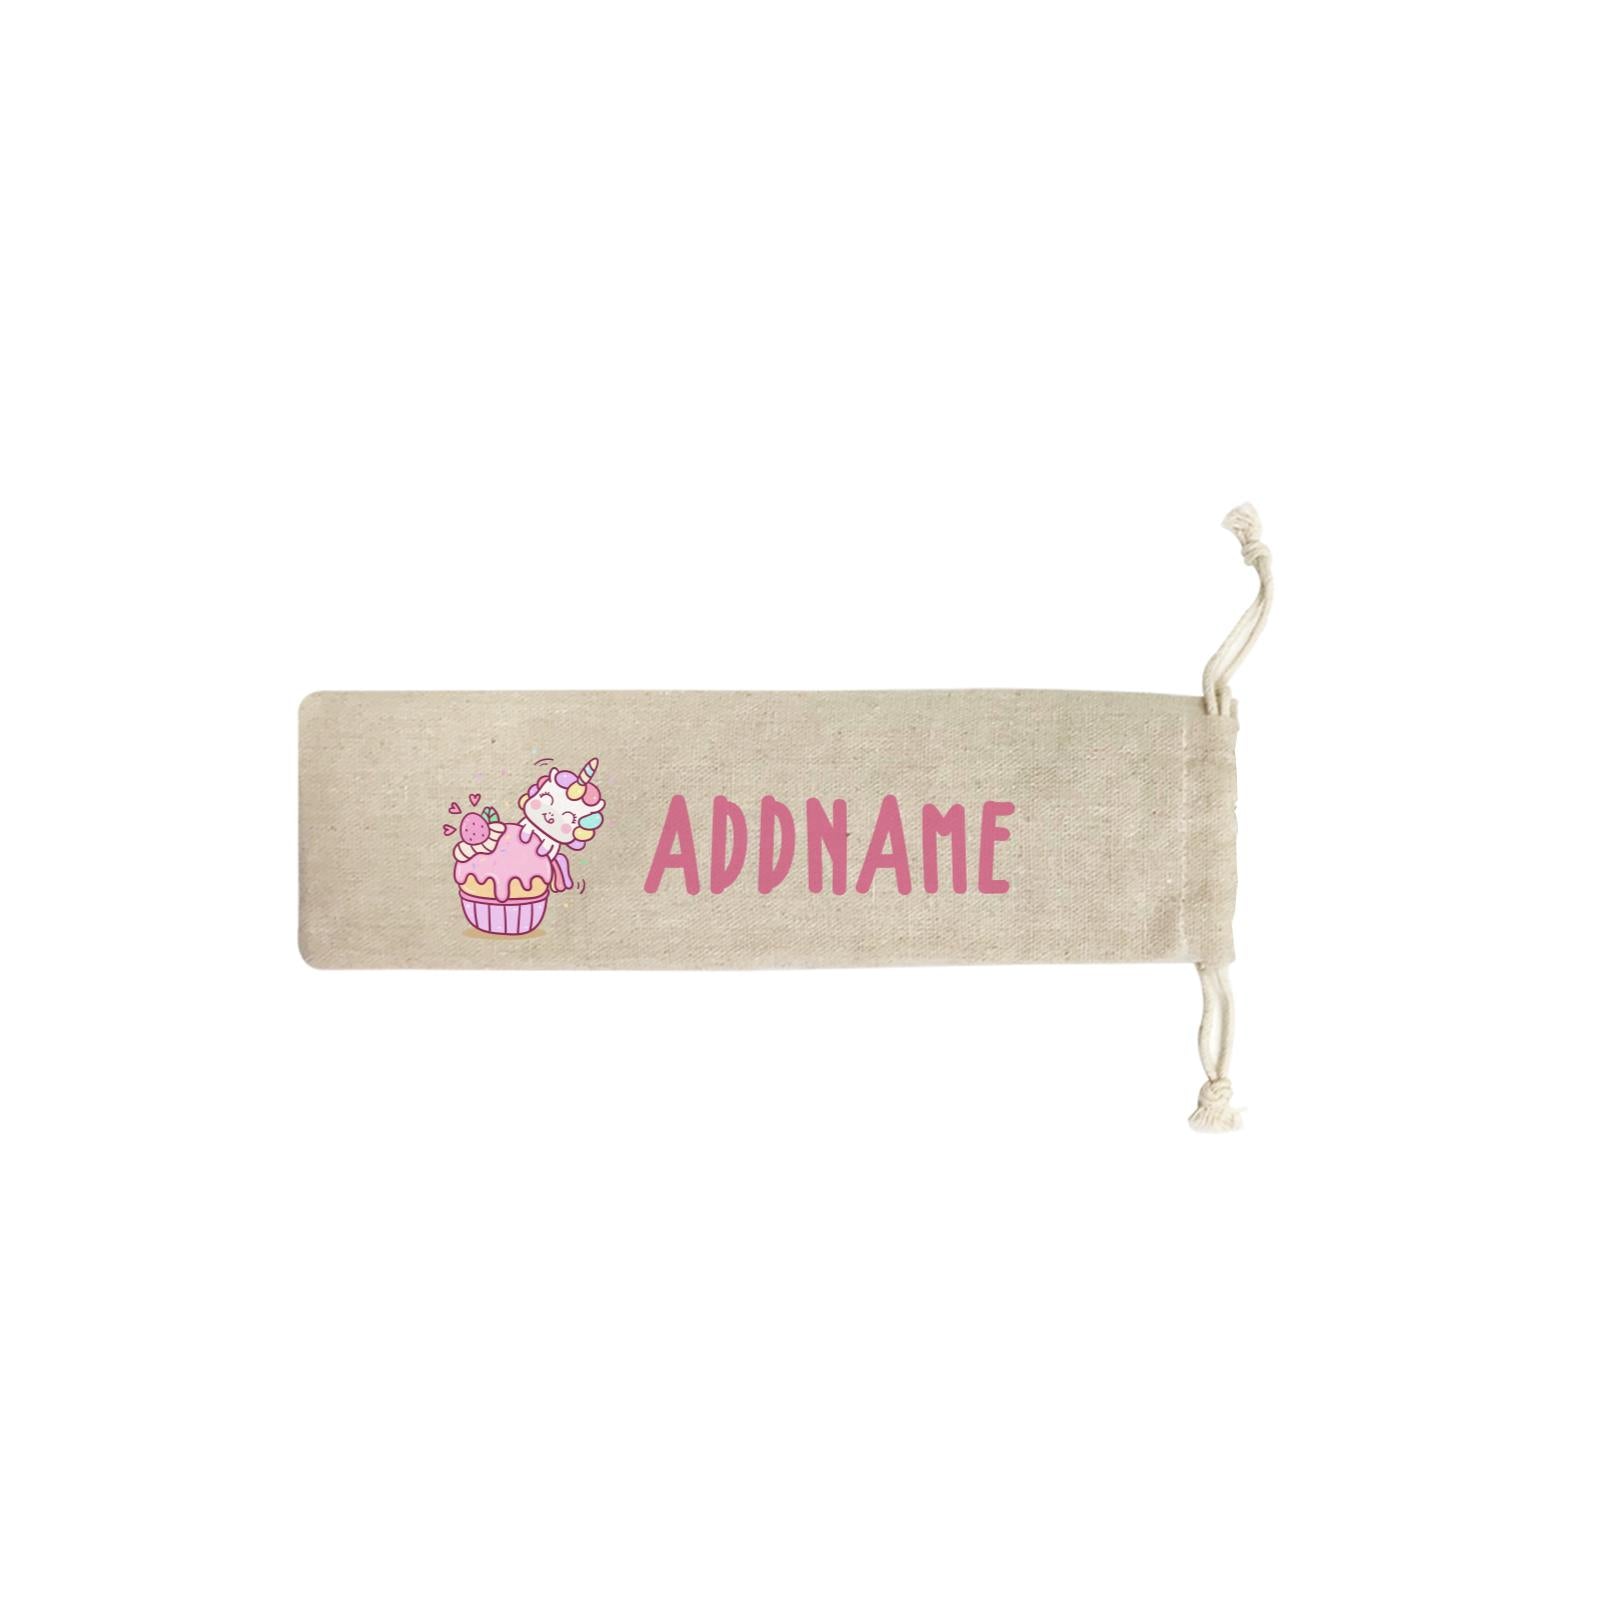 Unicorn And Princess Series Unicorn And Cupcake Addname SB Straw Pouch (No Straws included)